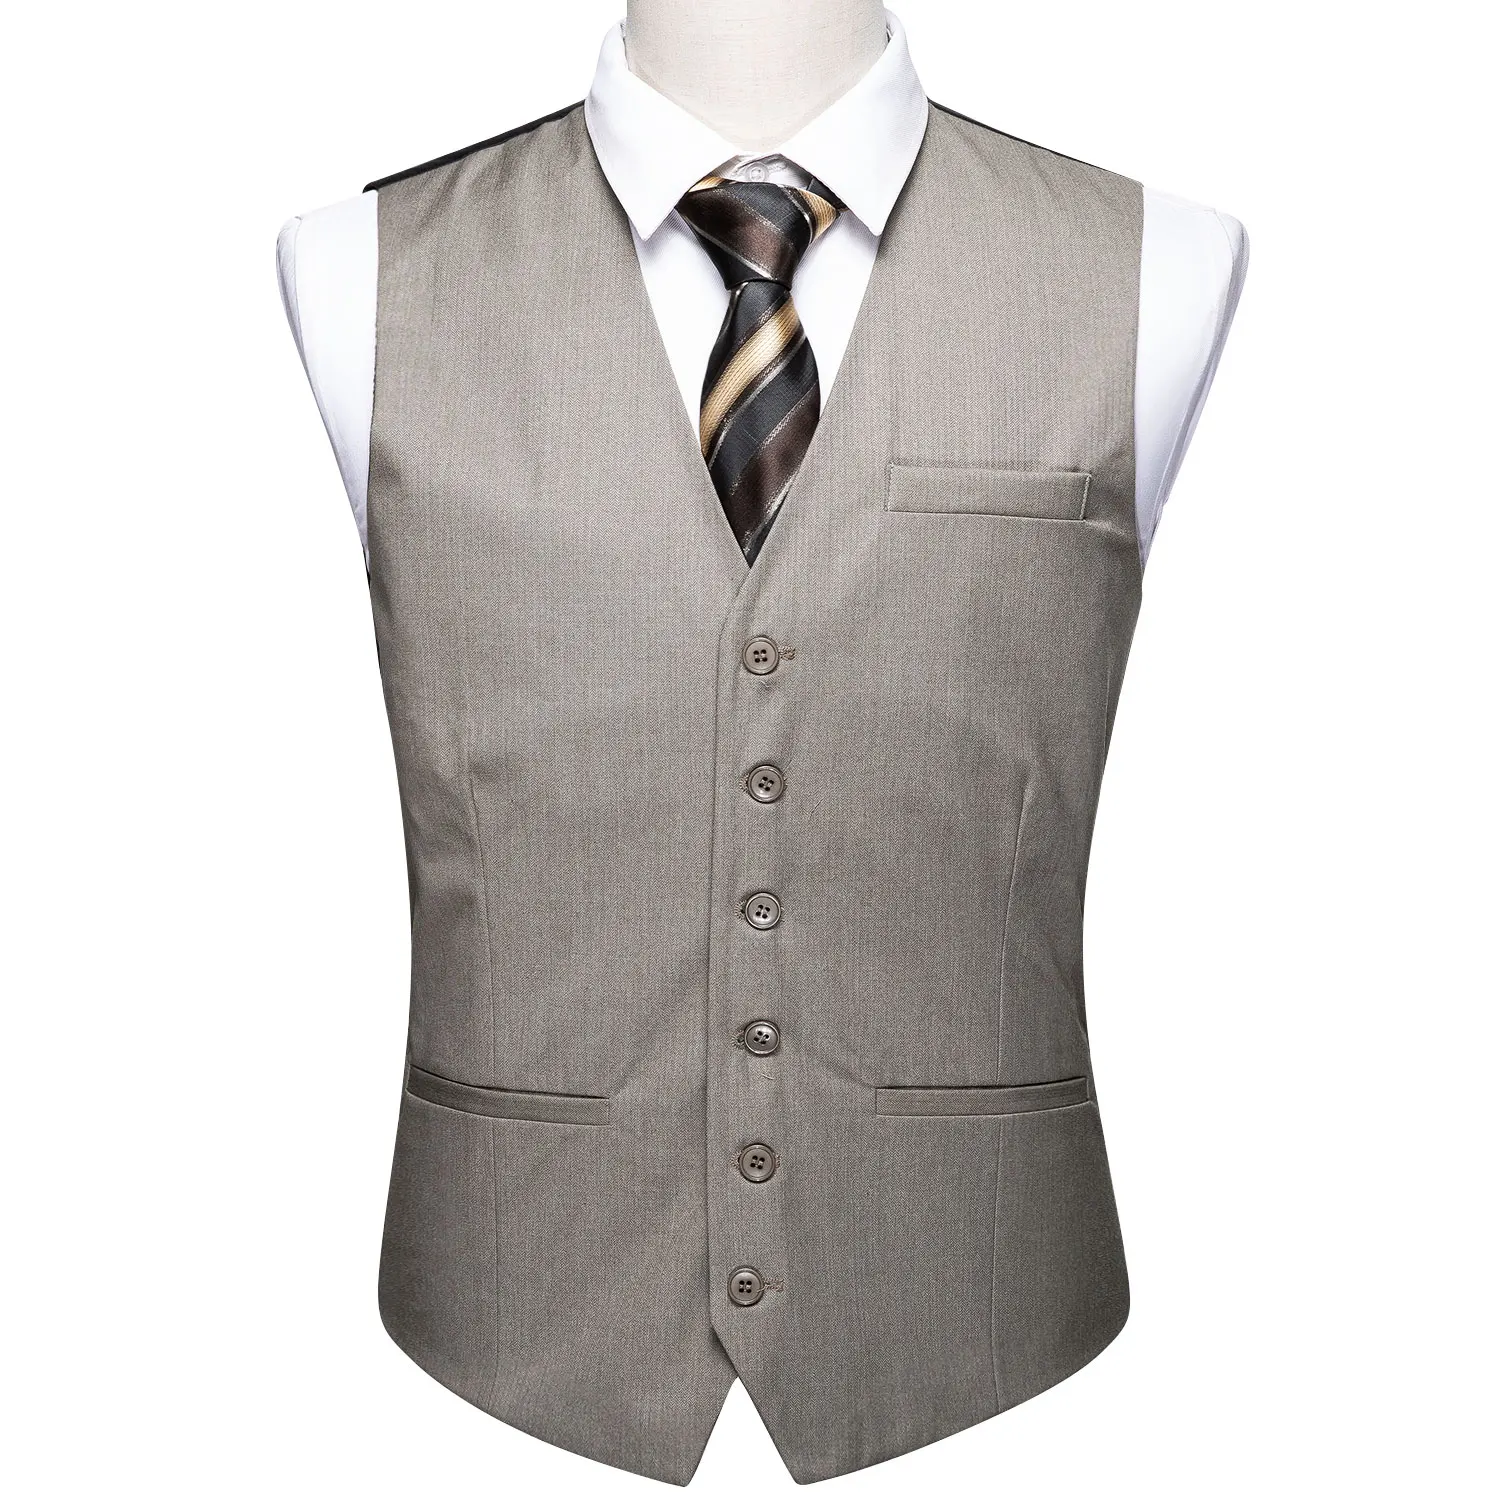 

Barry.Wang Mens Gray Solid Waistcoat Blend Tailored Collar V-neck 3 Pocket Check Suit Vest Tie Set Formal Leisure MD-2308